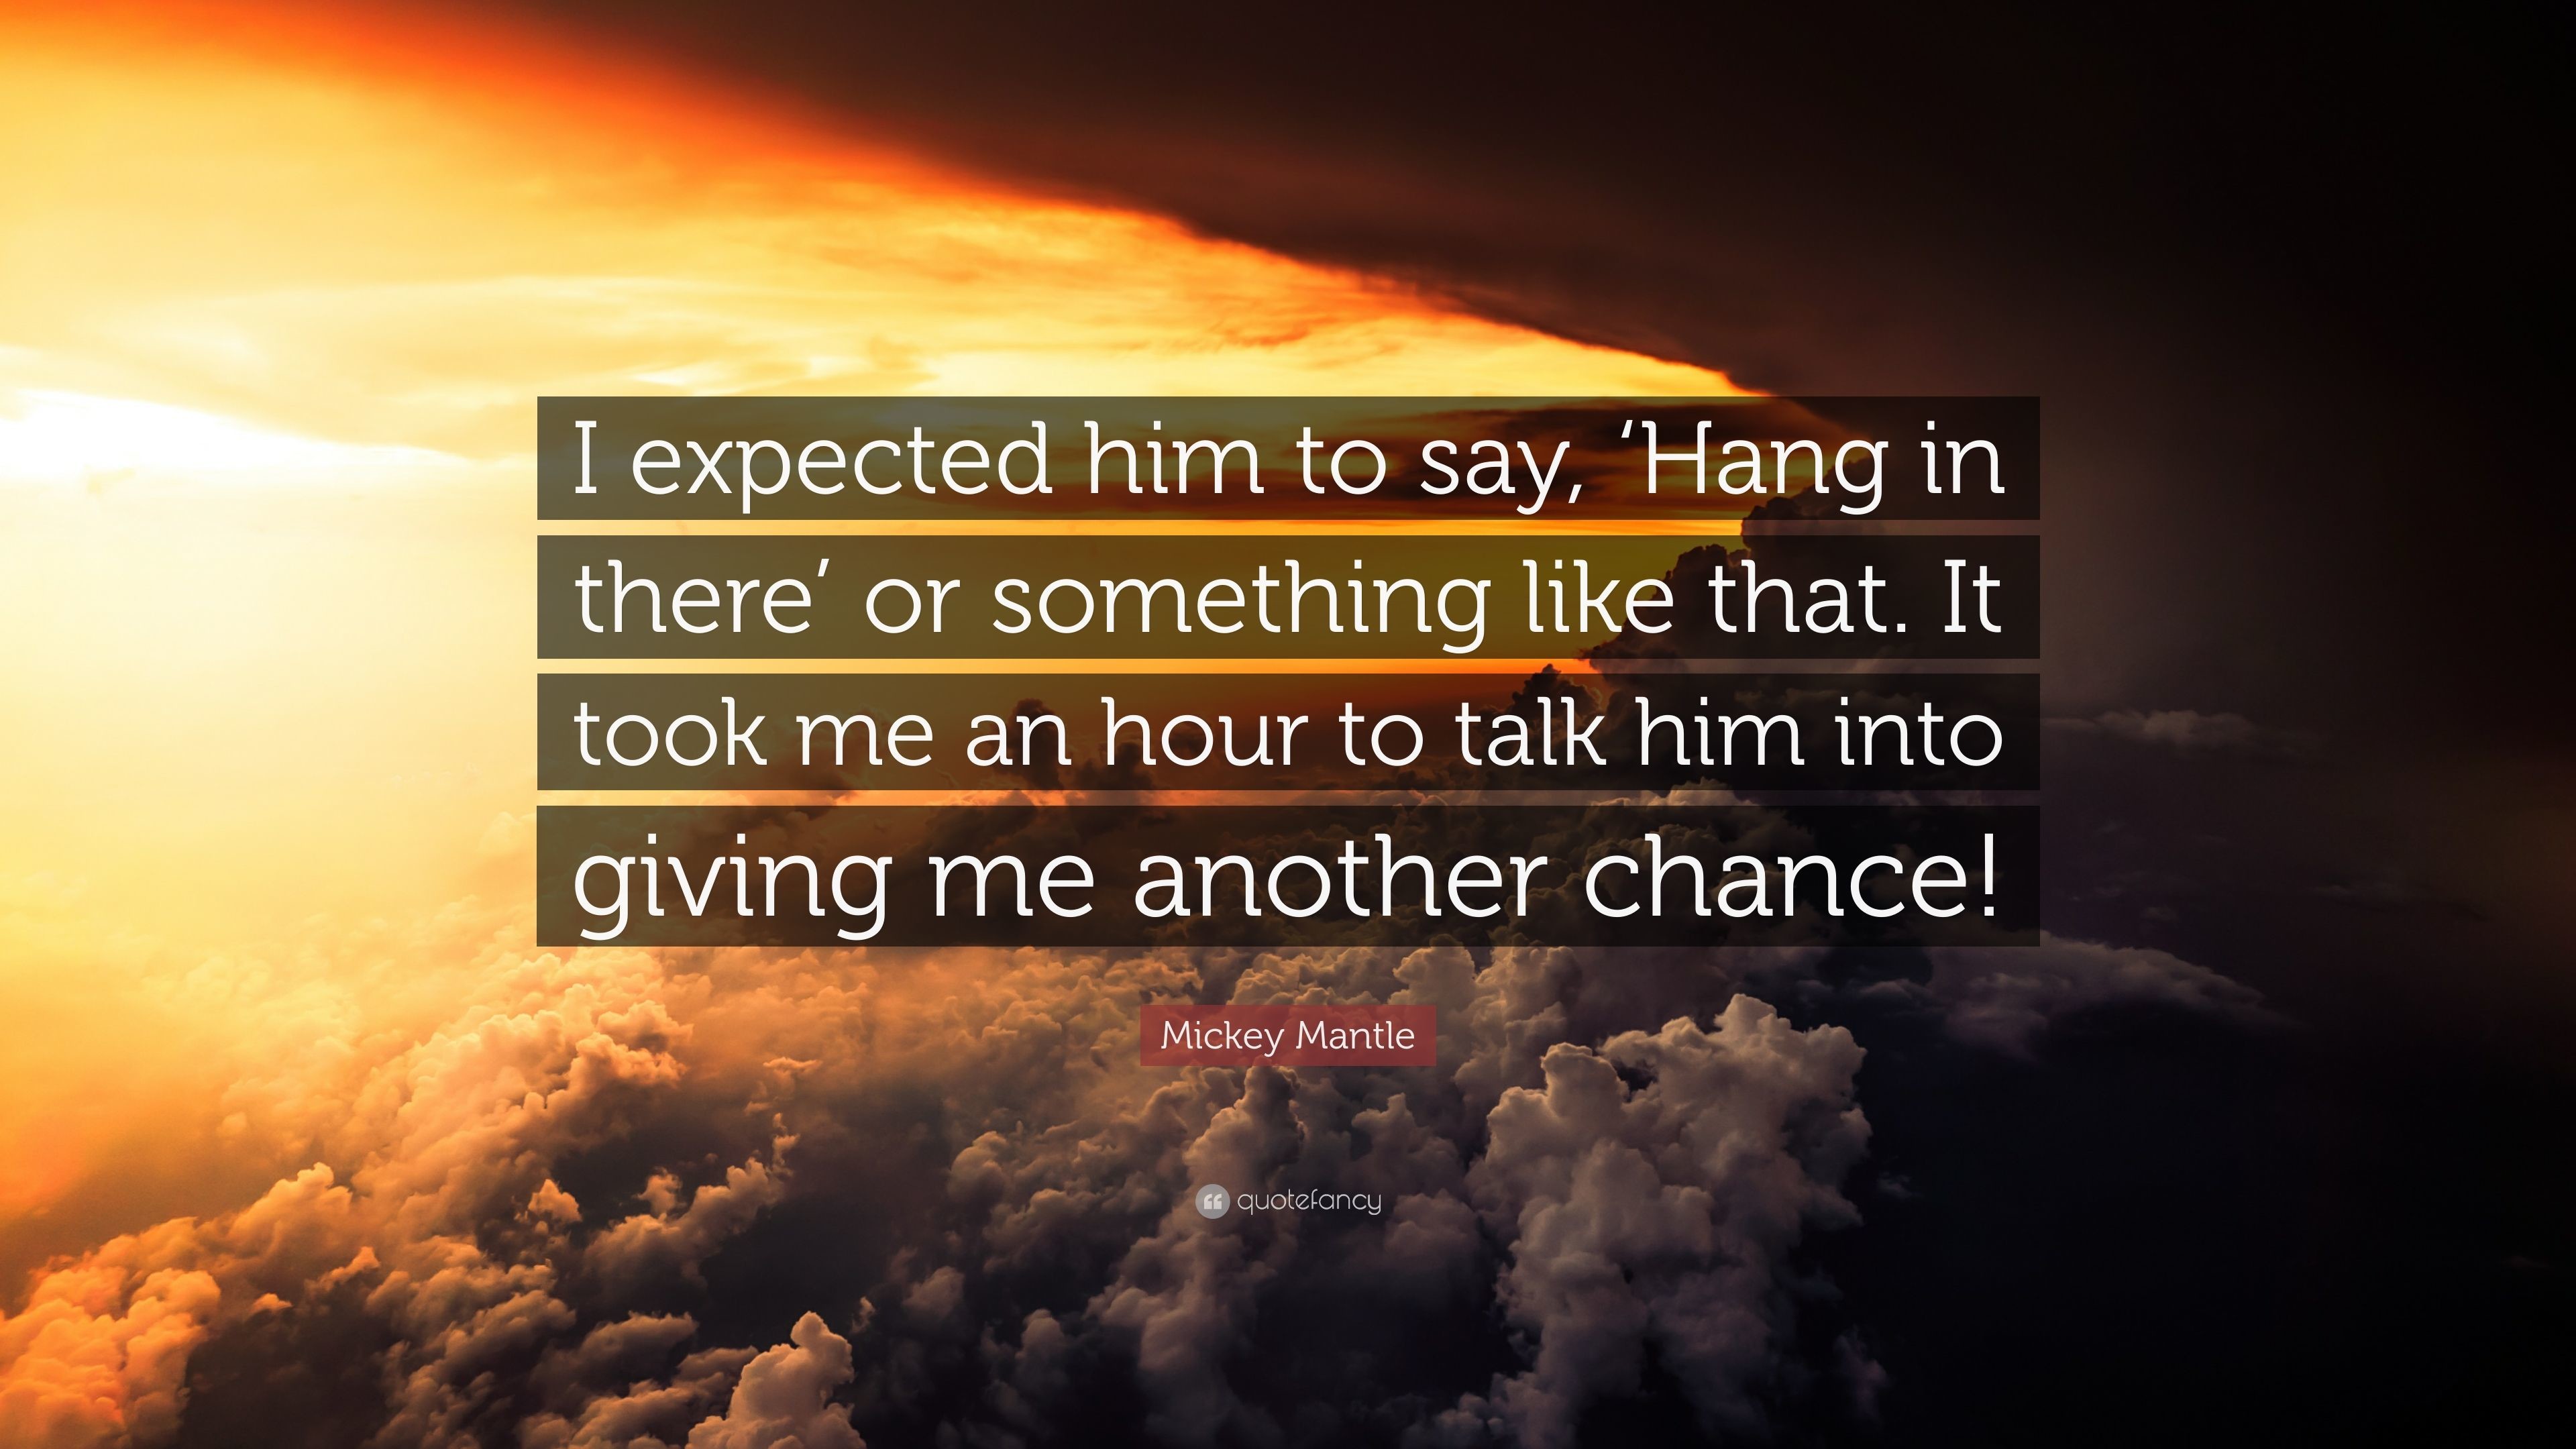 3840x2160 Mickey Mantle Quote: “I expected him to say, 'Hang in there'